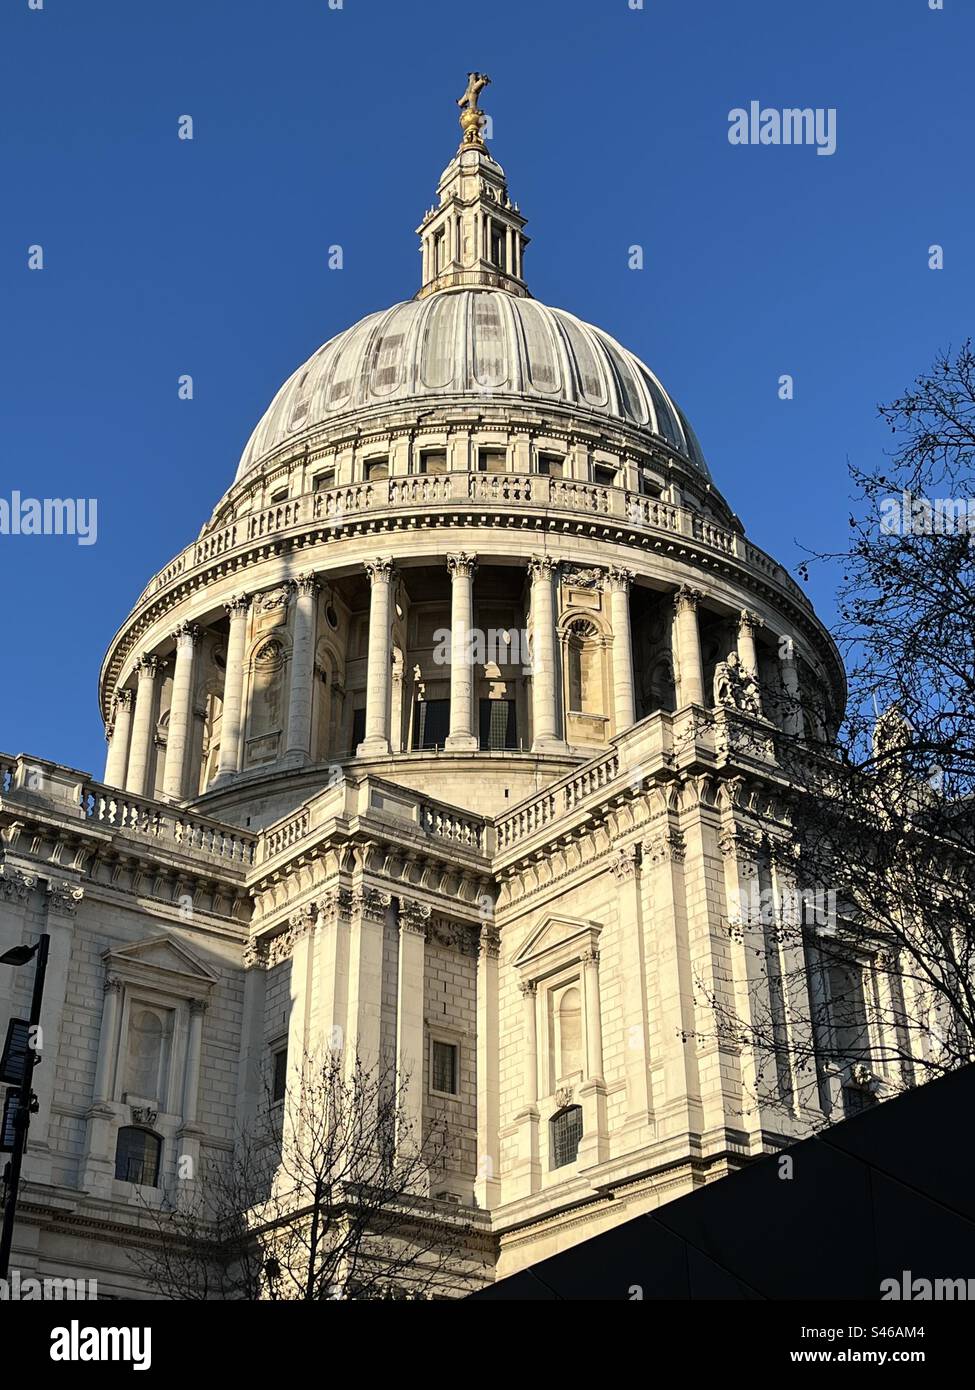 The Dome, St Paul’s Cathedral, London Stock Photo